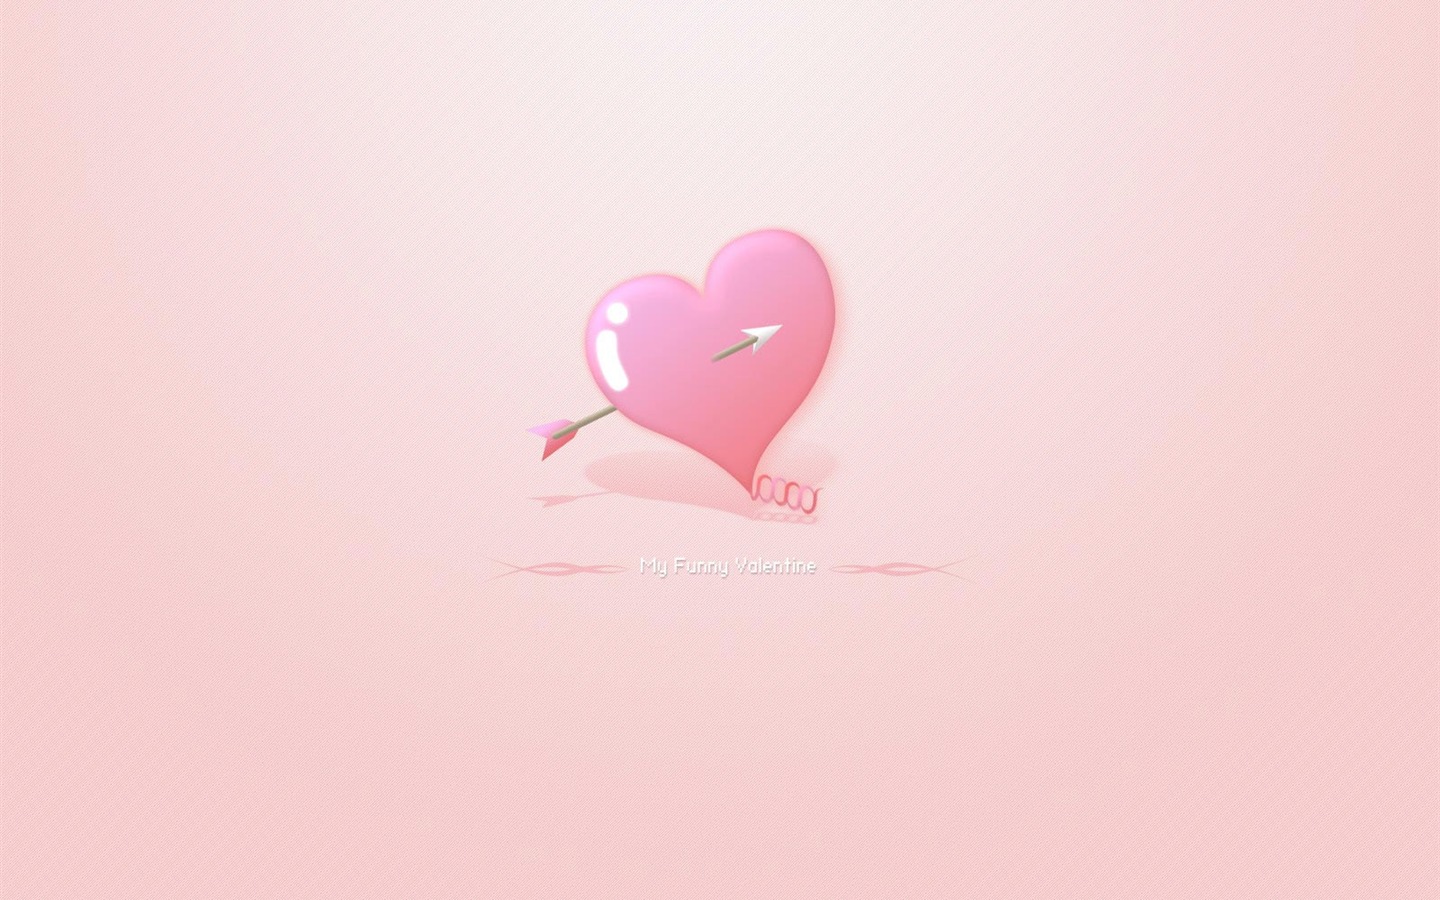 Valentine's Day Theme Wallpapers (3) #9 - 1440x900